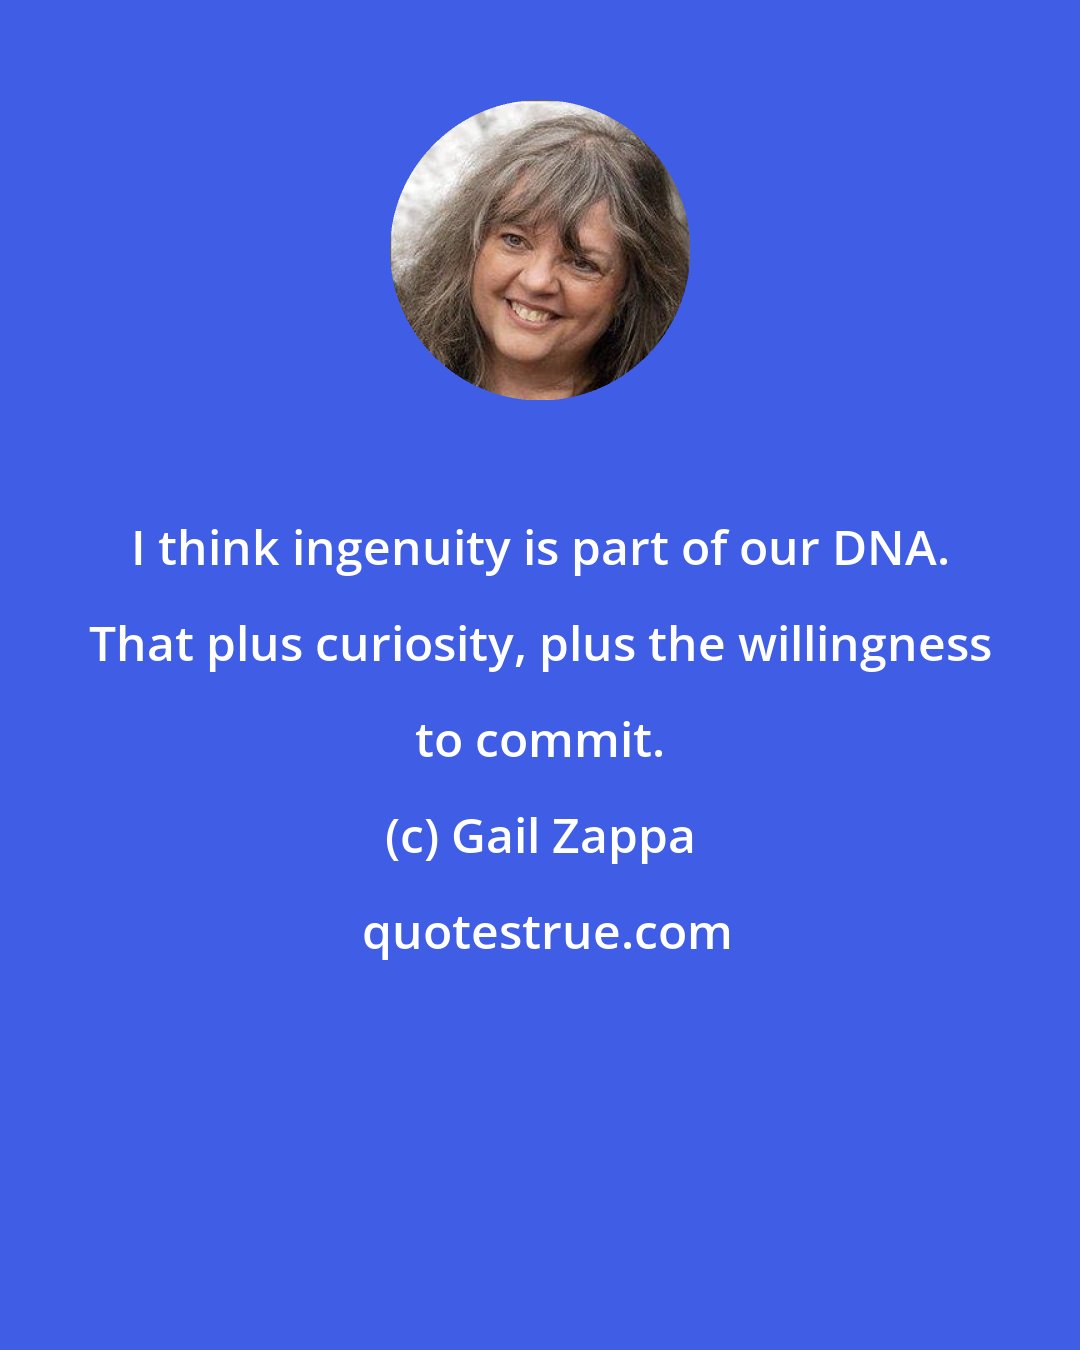 Gail Zappa: I think ingenuity is part of our DNA. That plus curiosity, plus the willingness to commit.